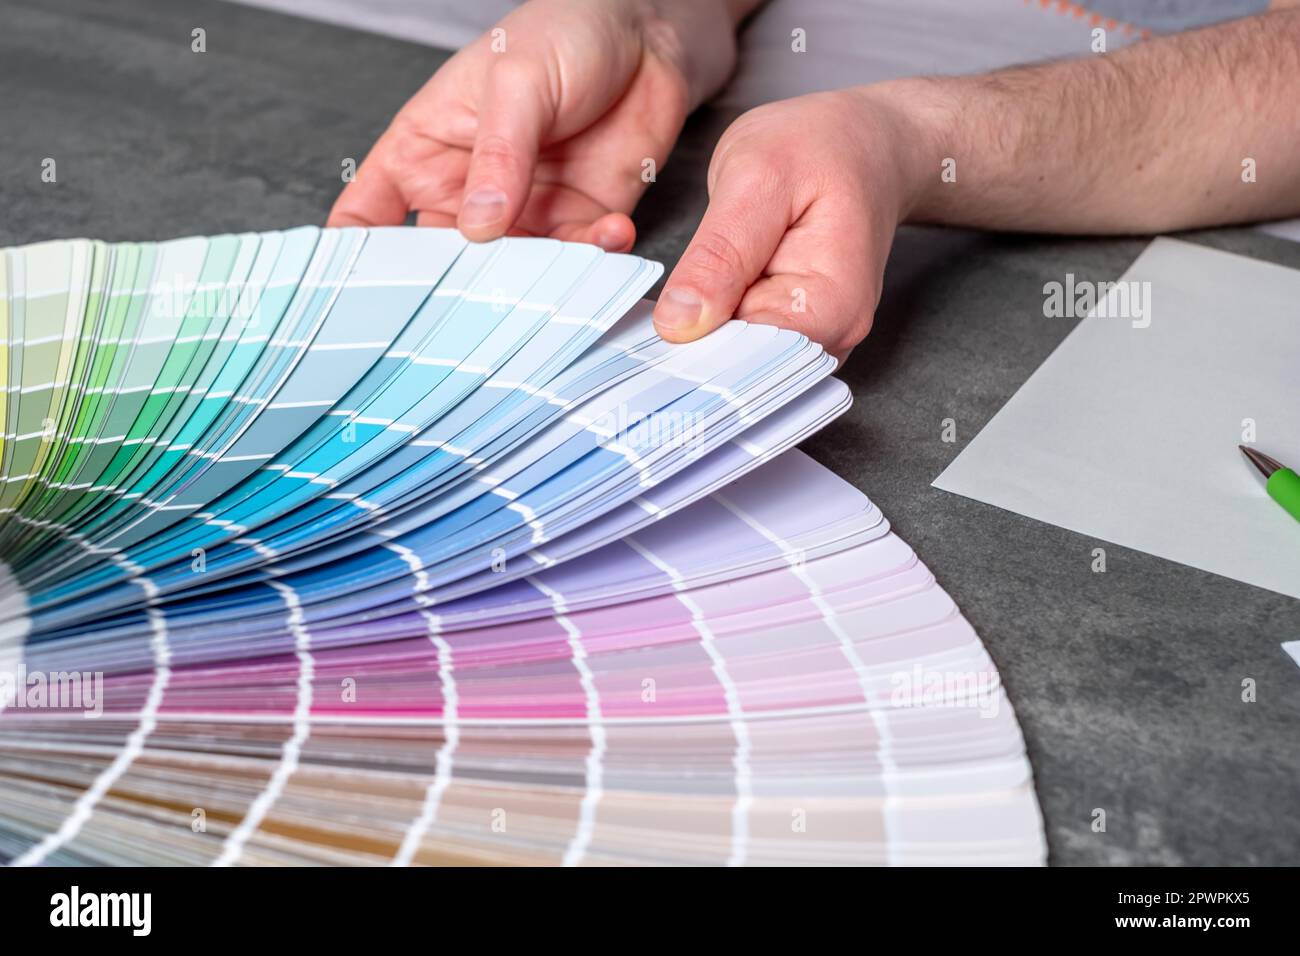 Designer or architect choosing samples the colors painting of the walls into room. Renovation of the house. Interior design inspiration Stock Photo